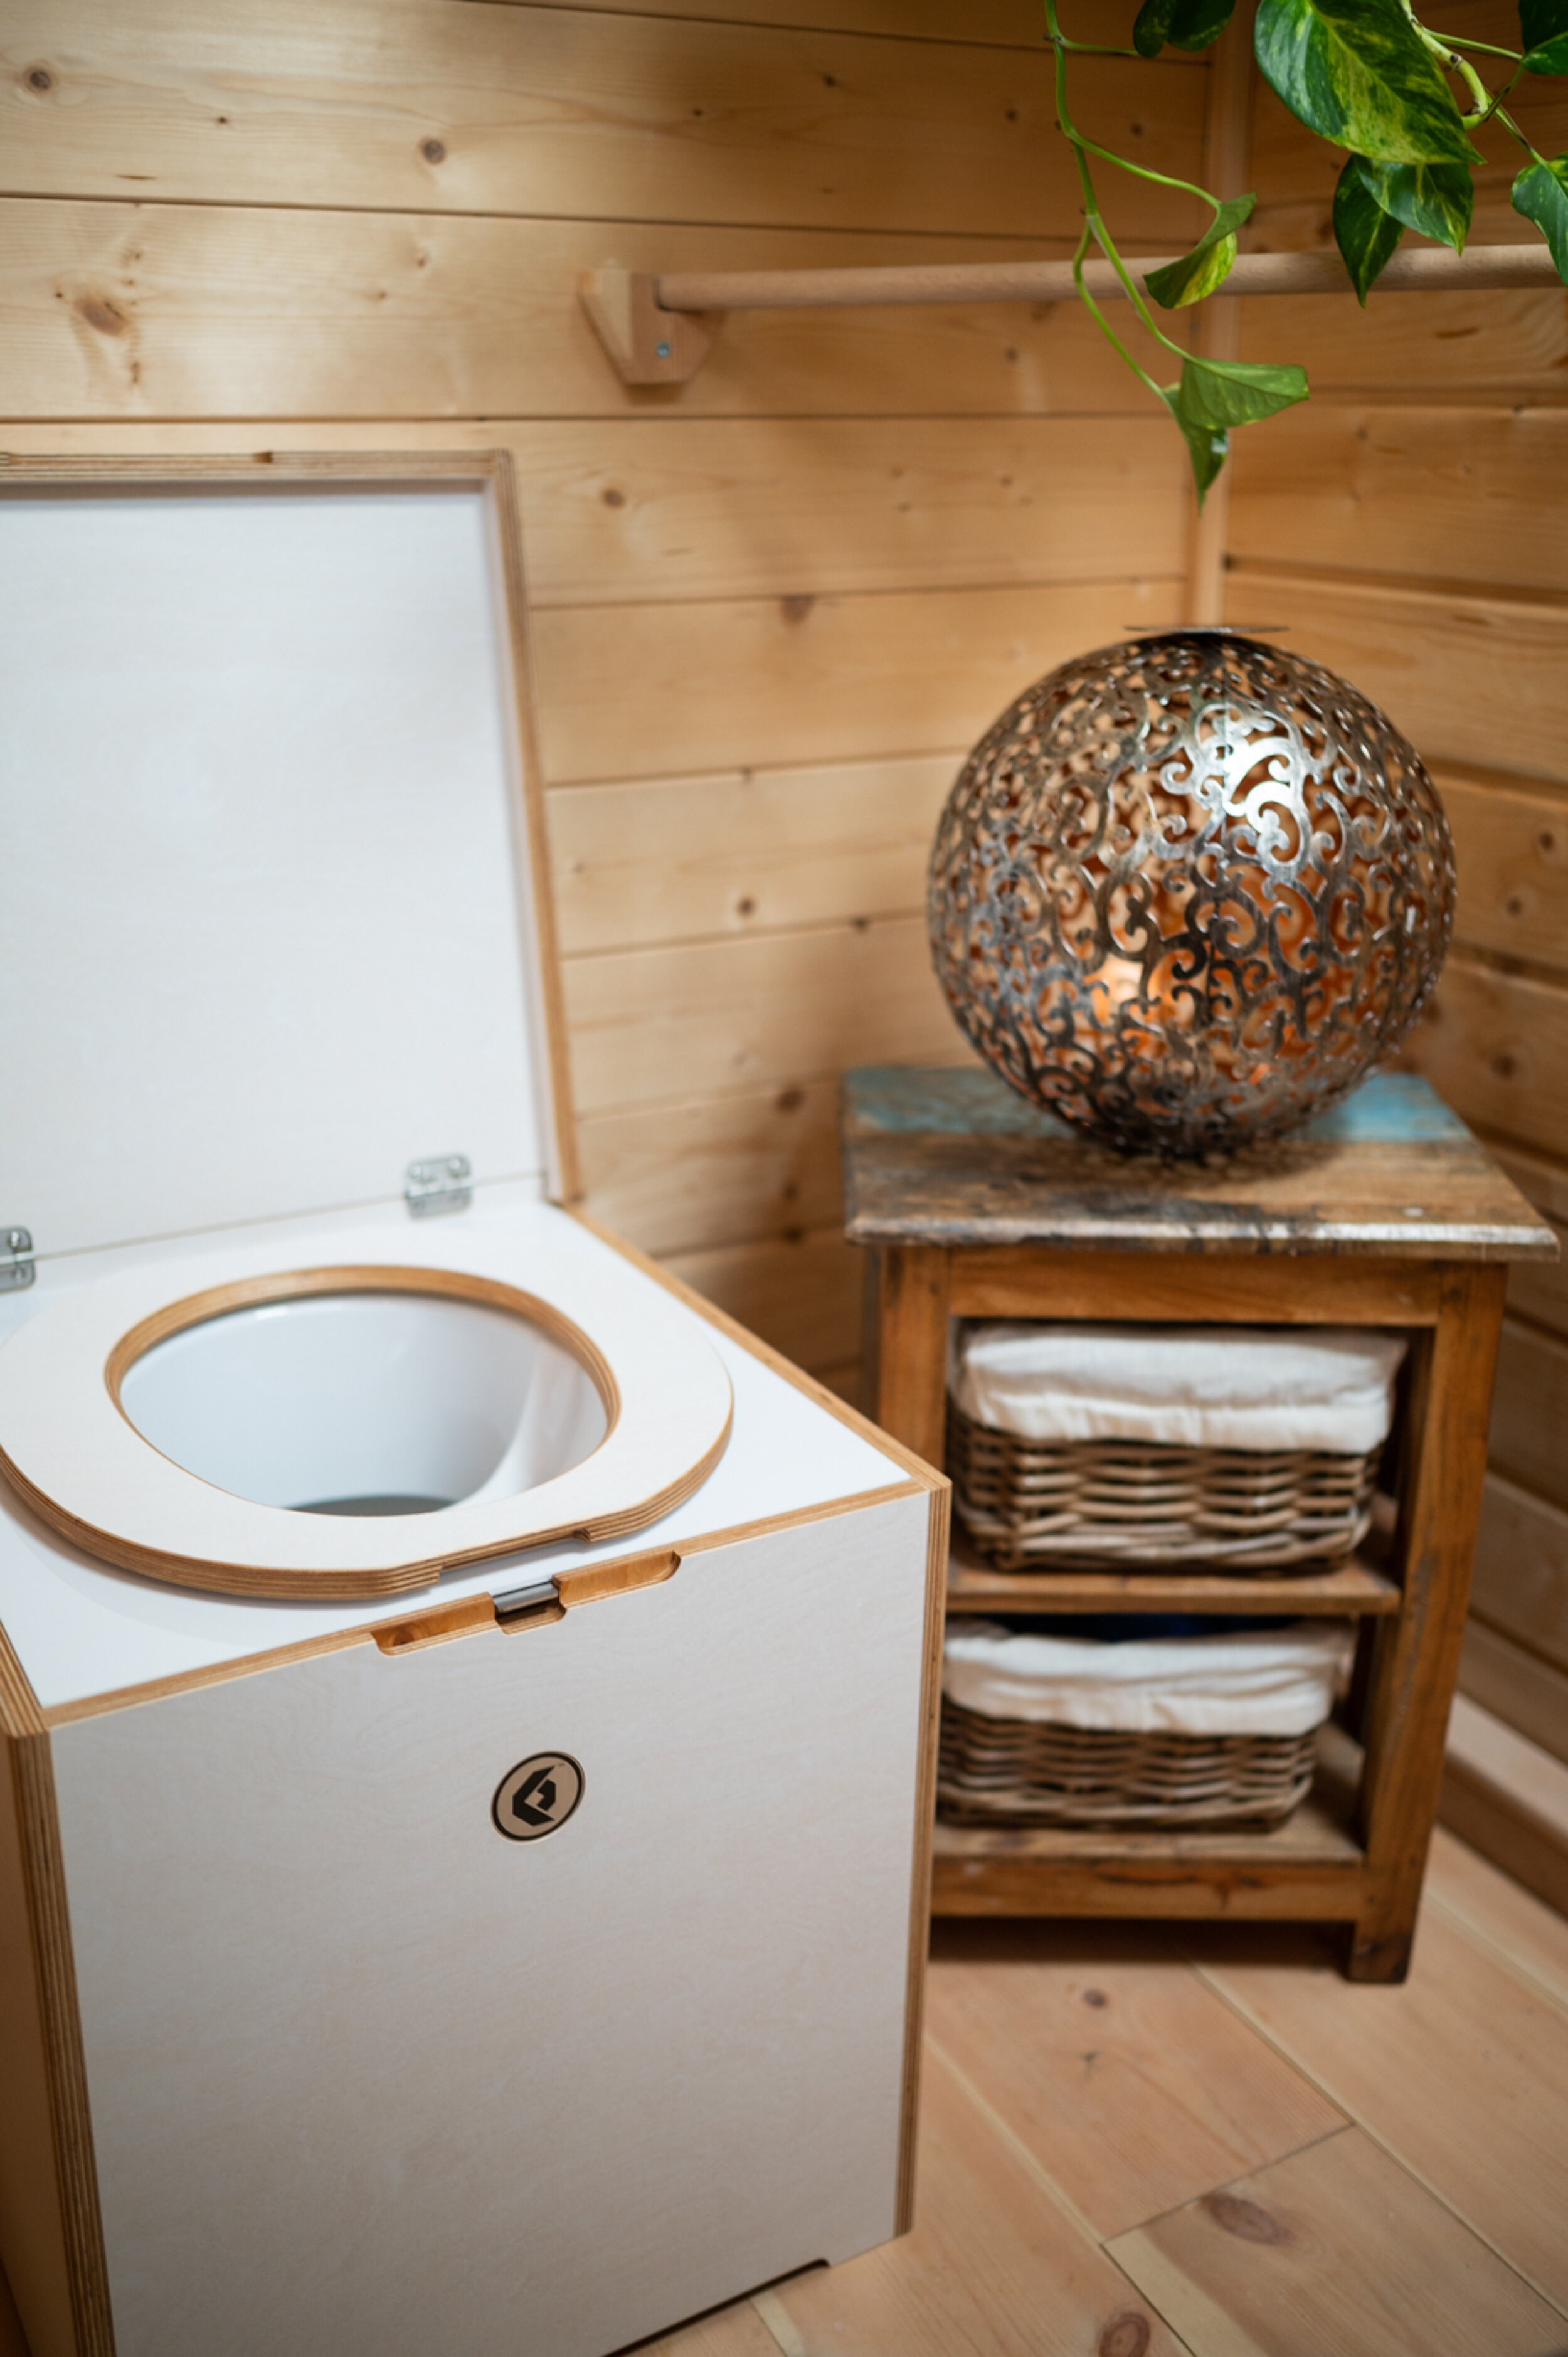 Our FancyLoo is the stylish premium composting toilet for discerning people